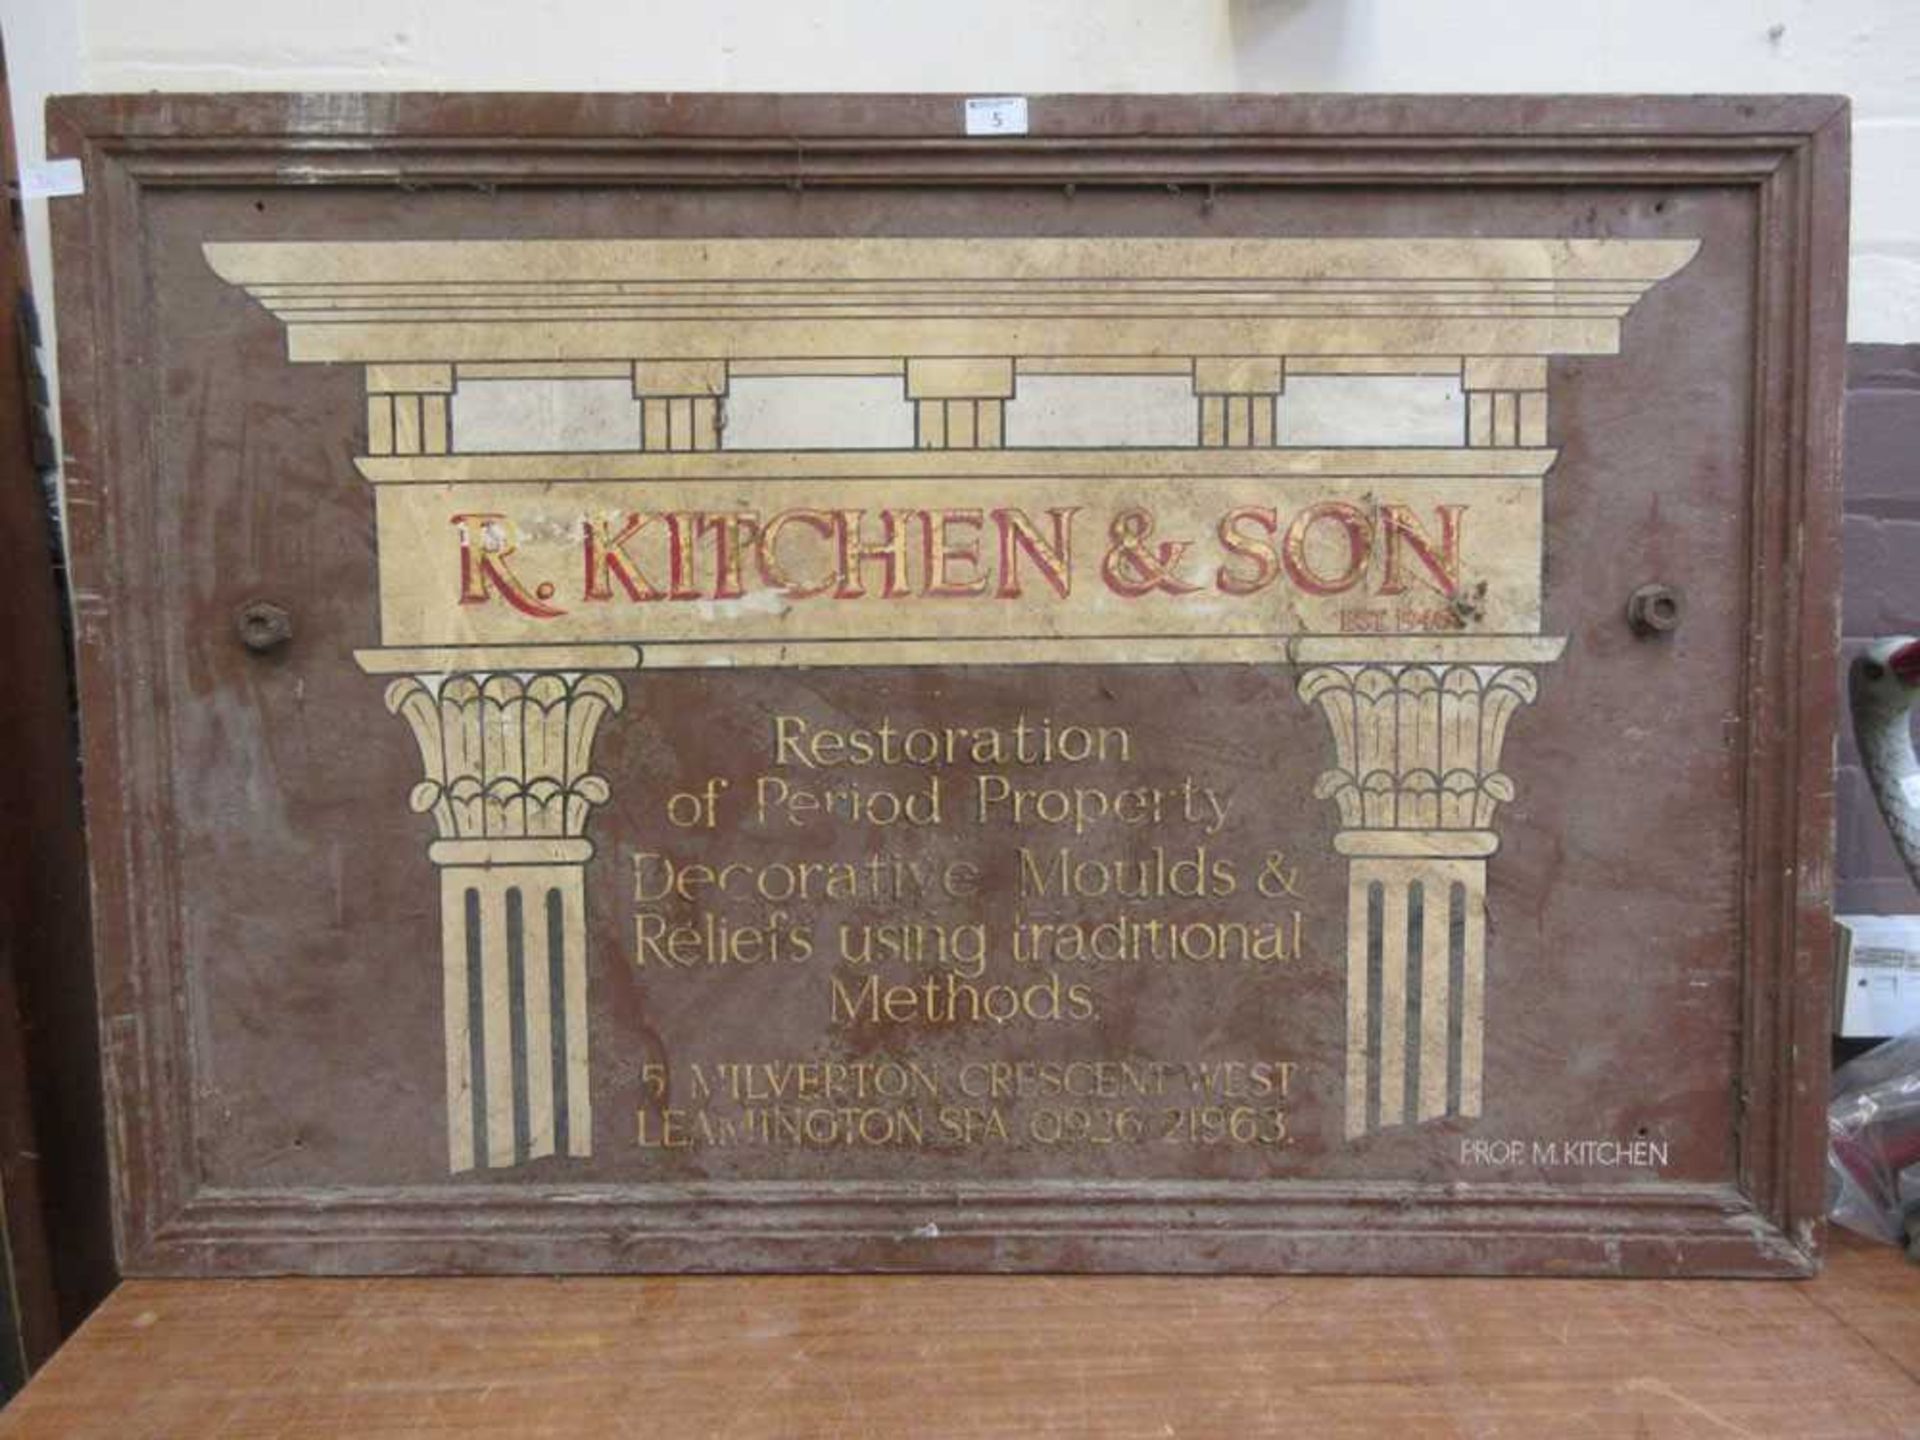 A mid-20th century shop sign 'R. Kitchen & Sons - Restoration of Period Property Based in